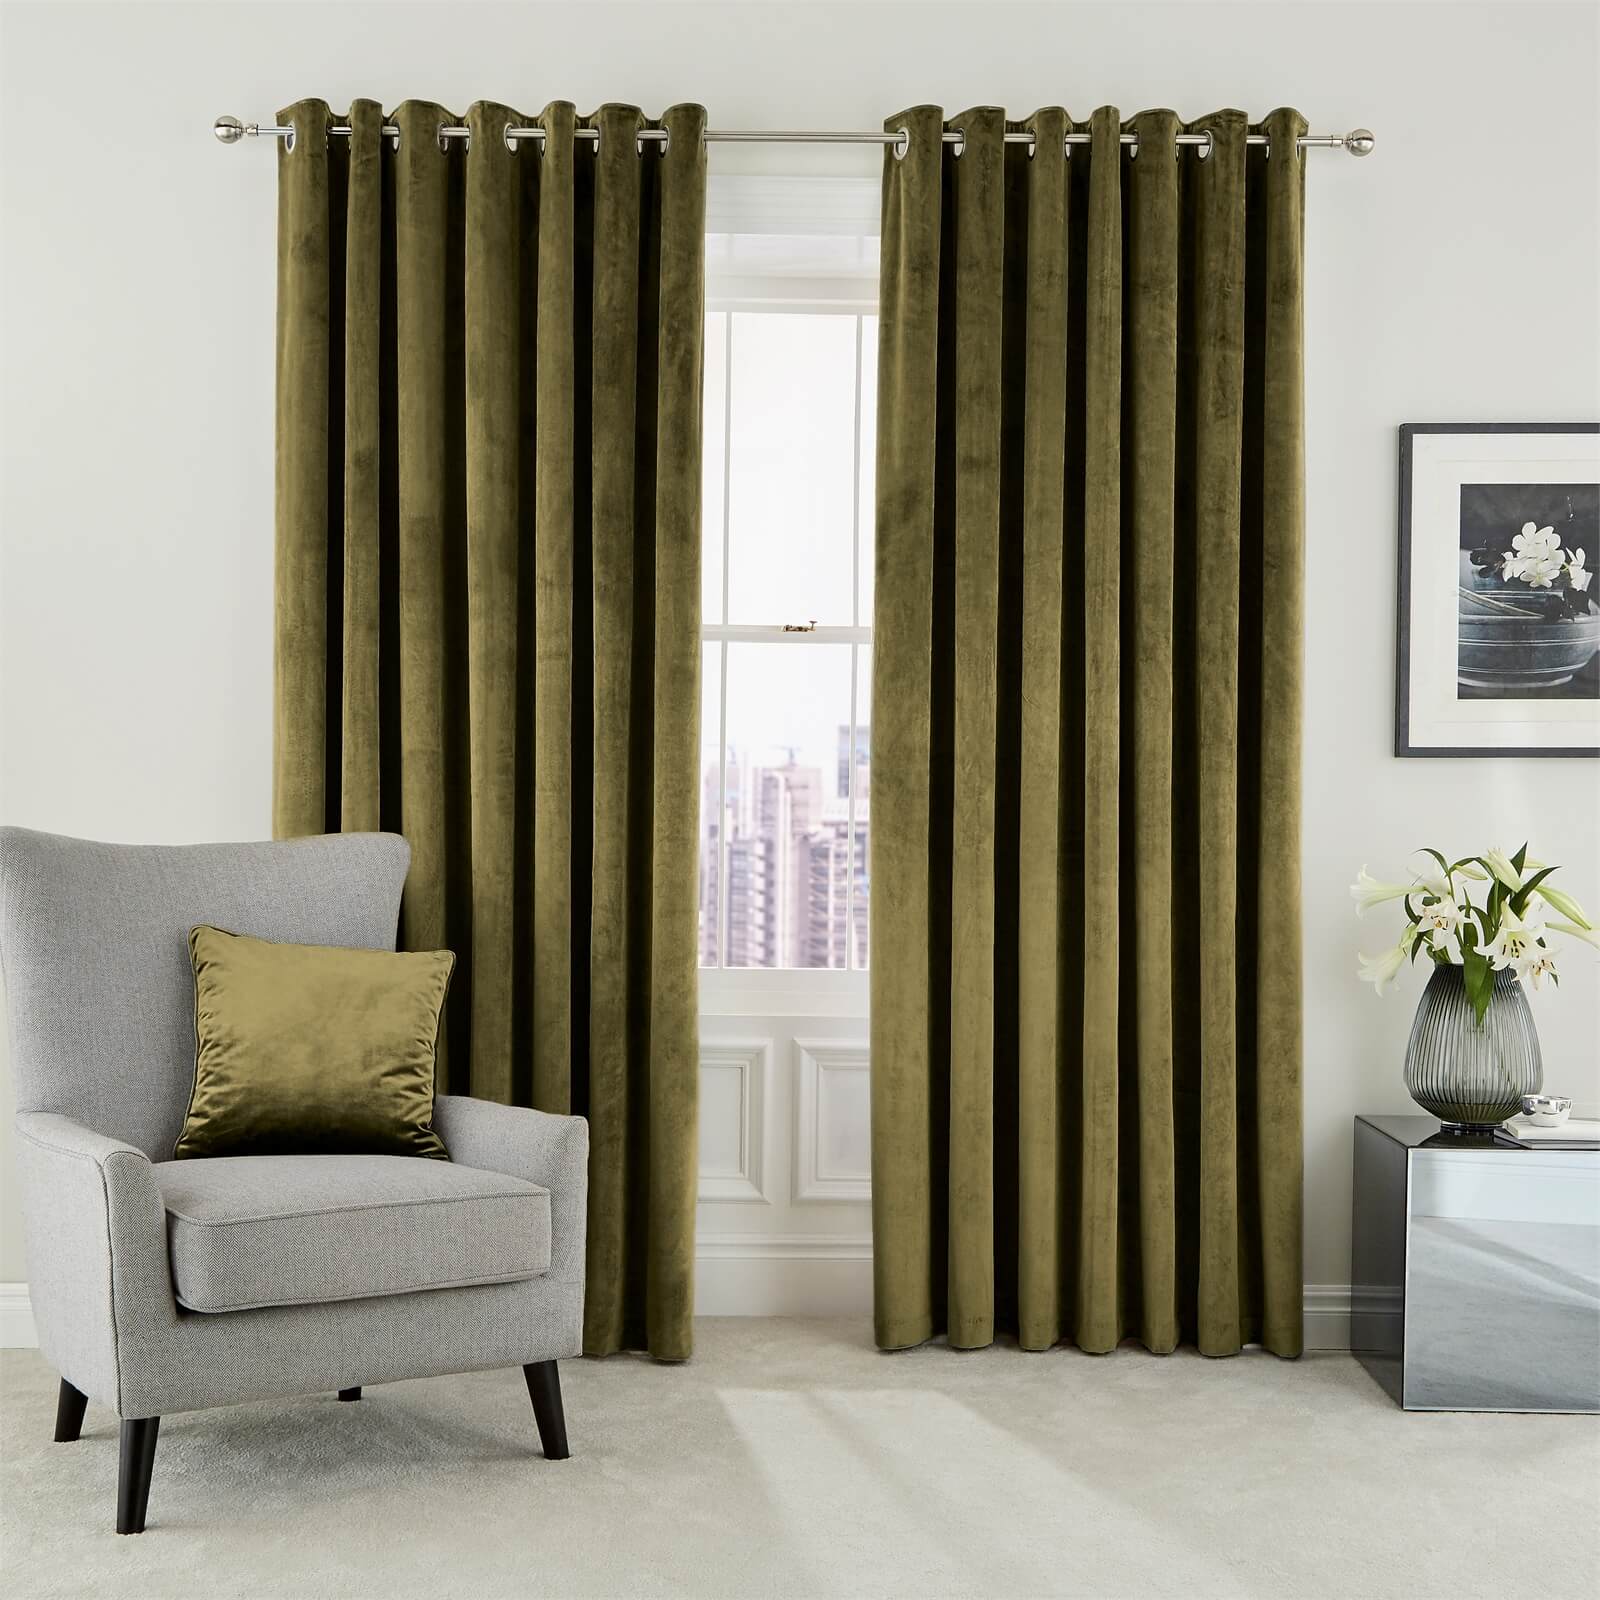 Peacock Blue Hotel Collection Escala Lined Curtains 66 x 90 - Olive